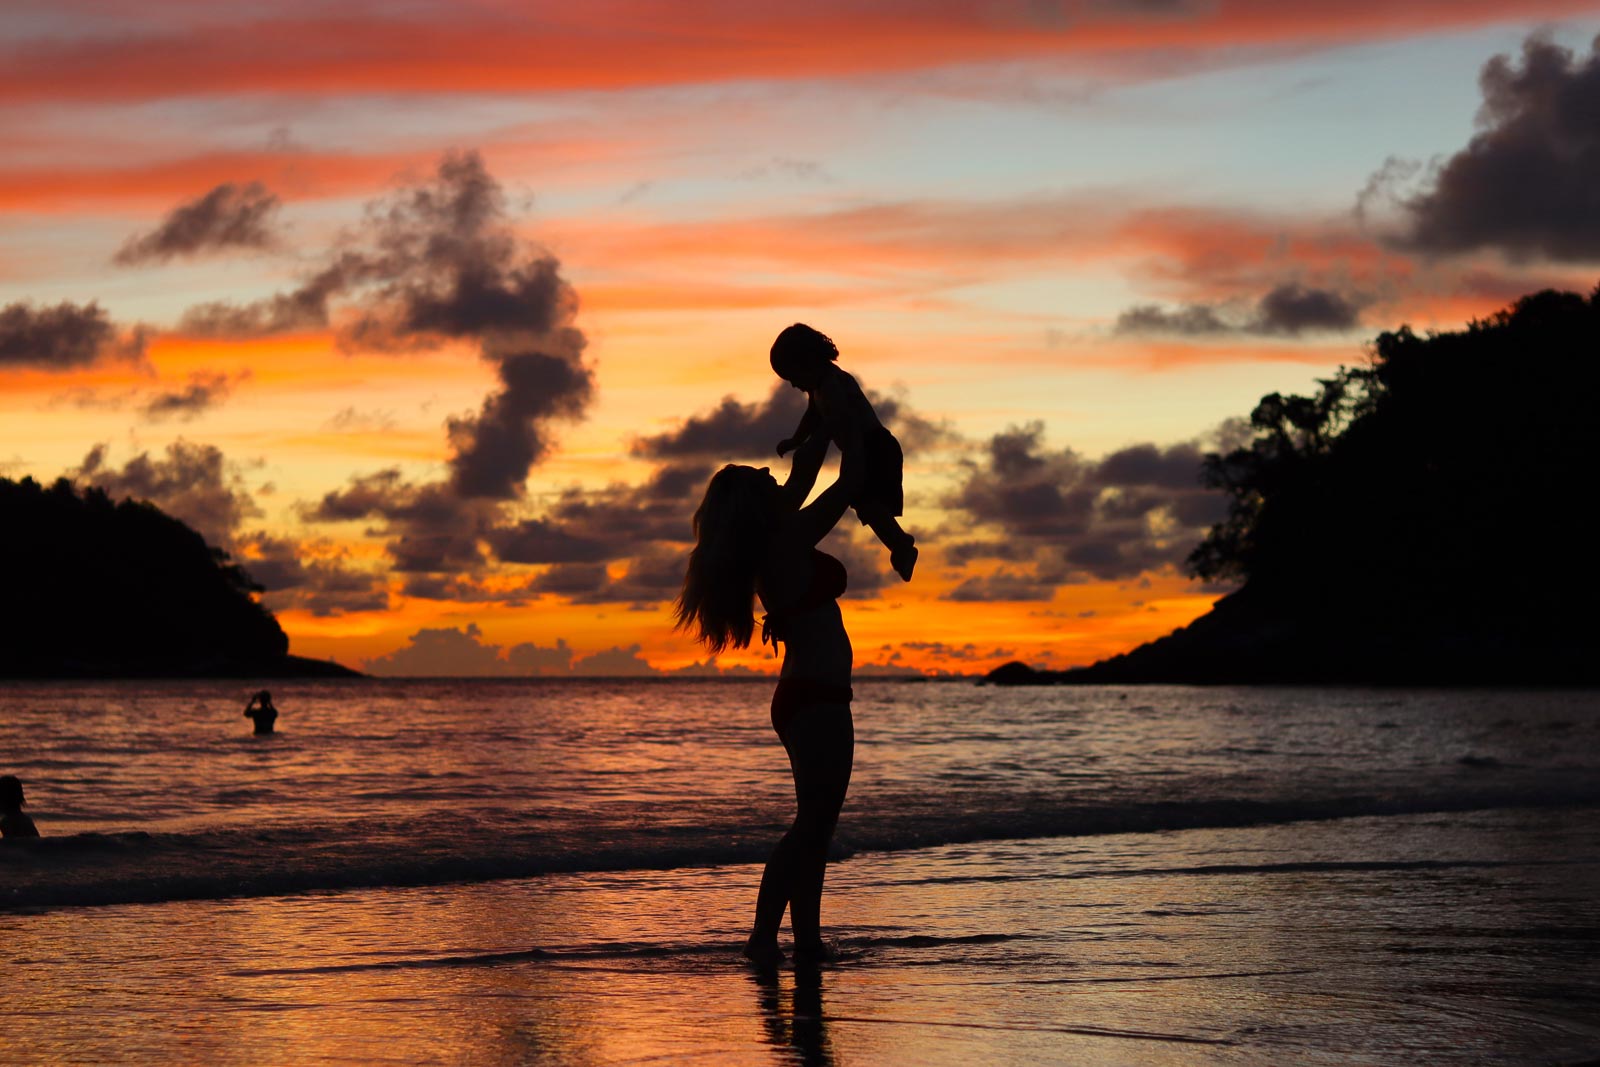 woman holding a baby above her head with an unreal orange andpinkish sunset on the beach